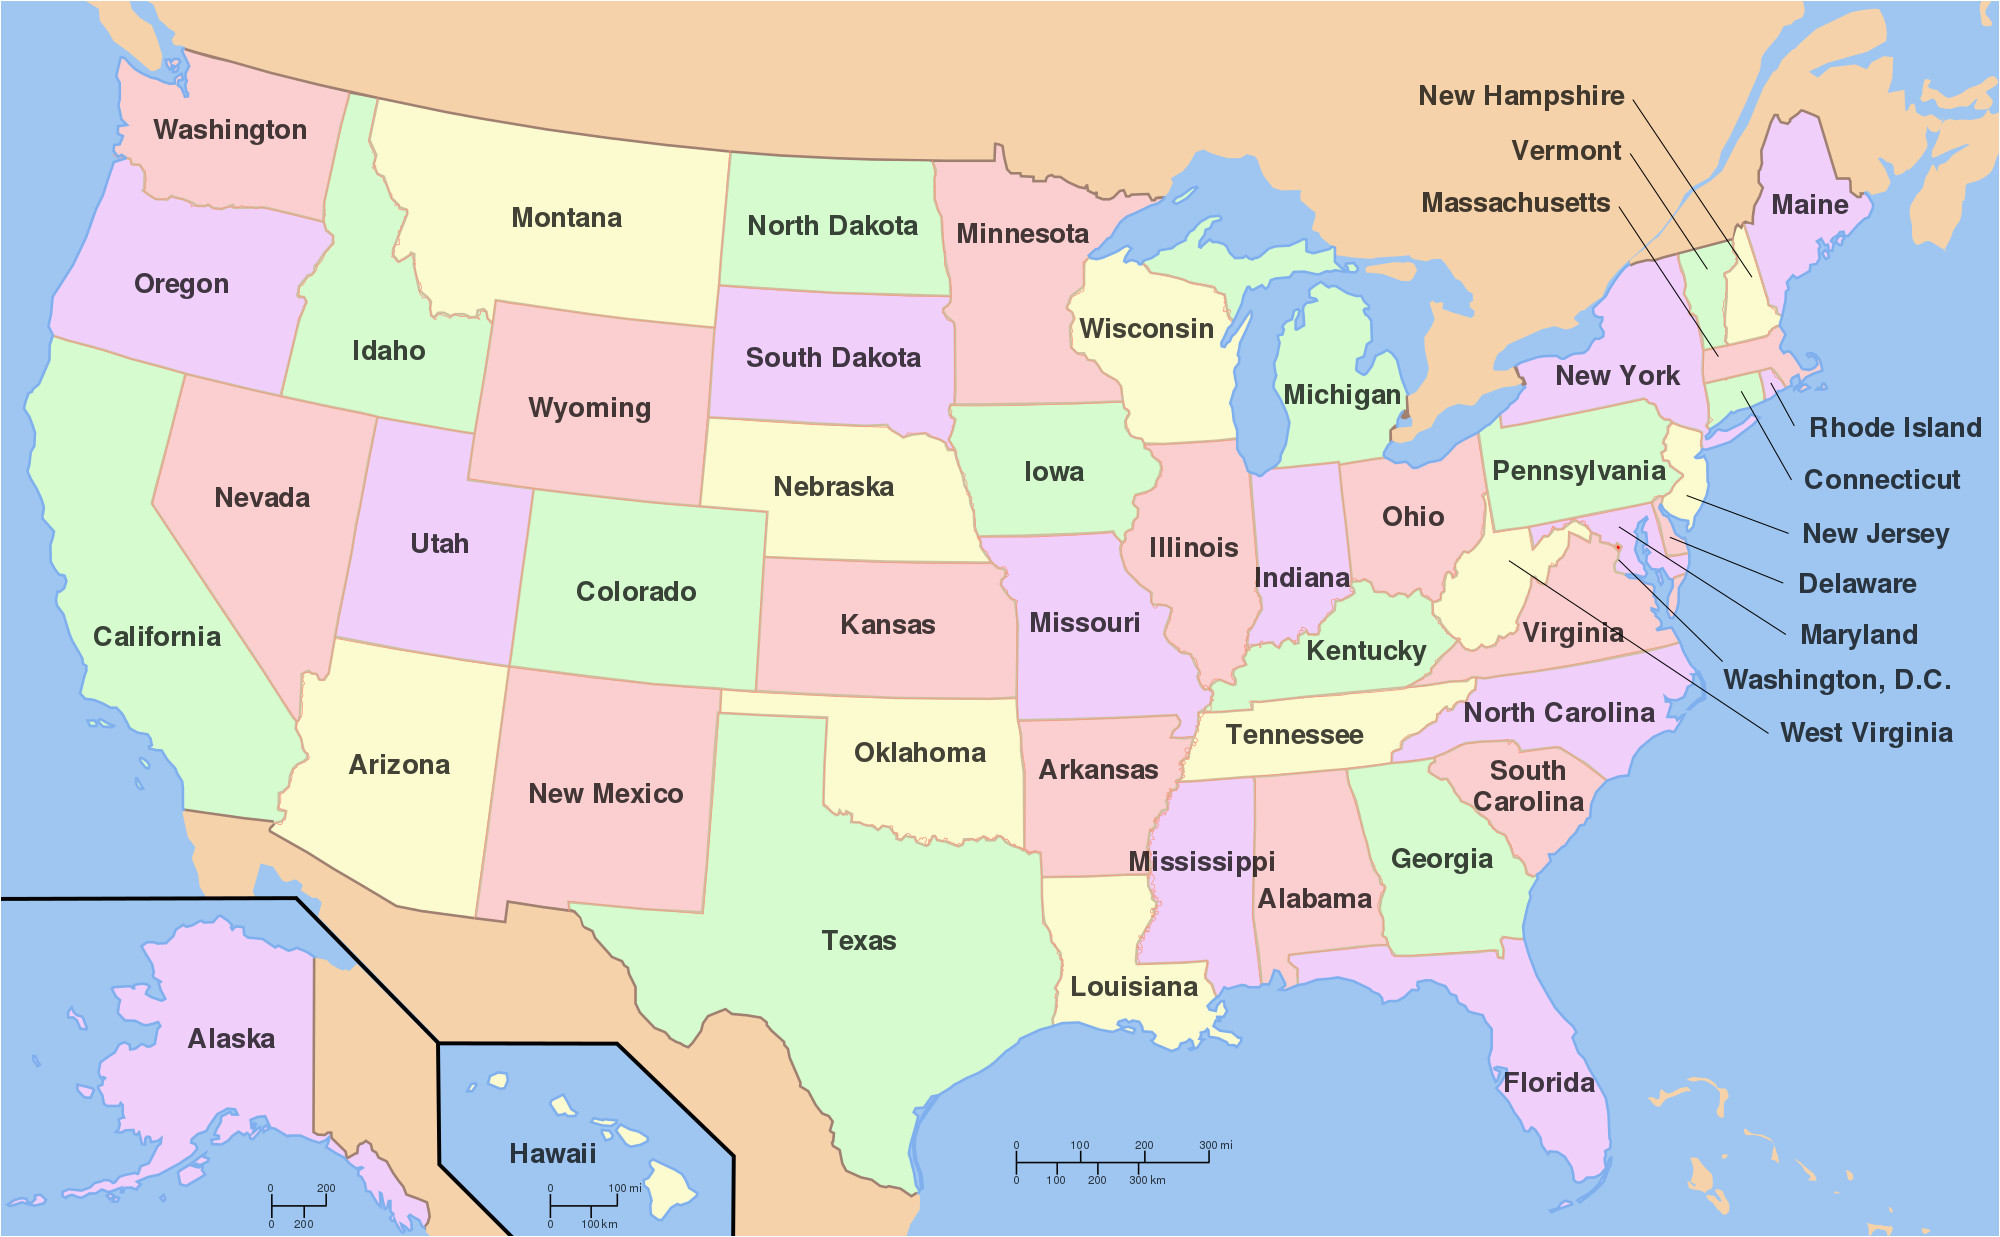 Michigan Thumb area Map File Map Of Usa with State Names Svg Wikimedia Commons